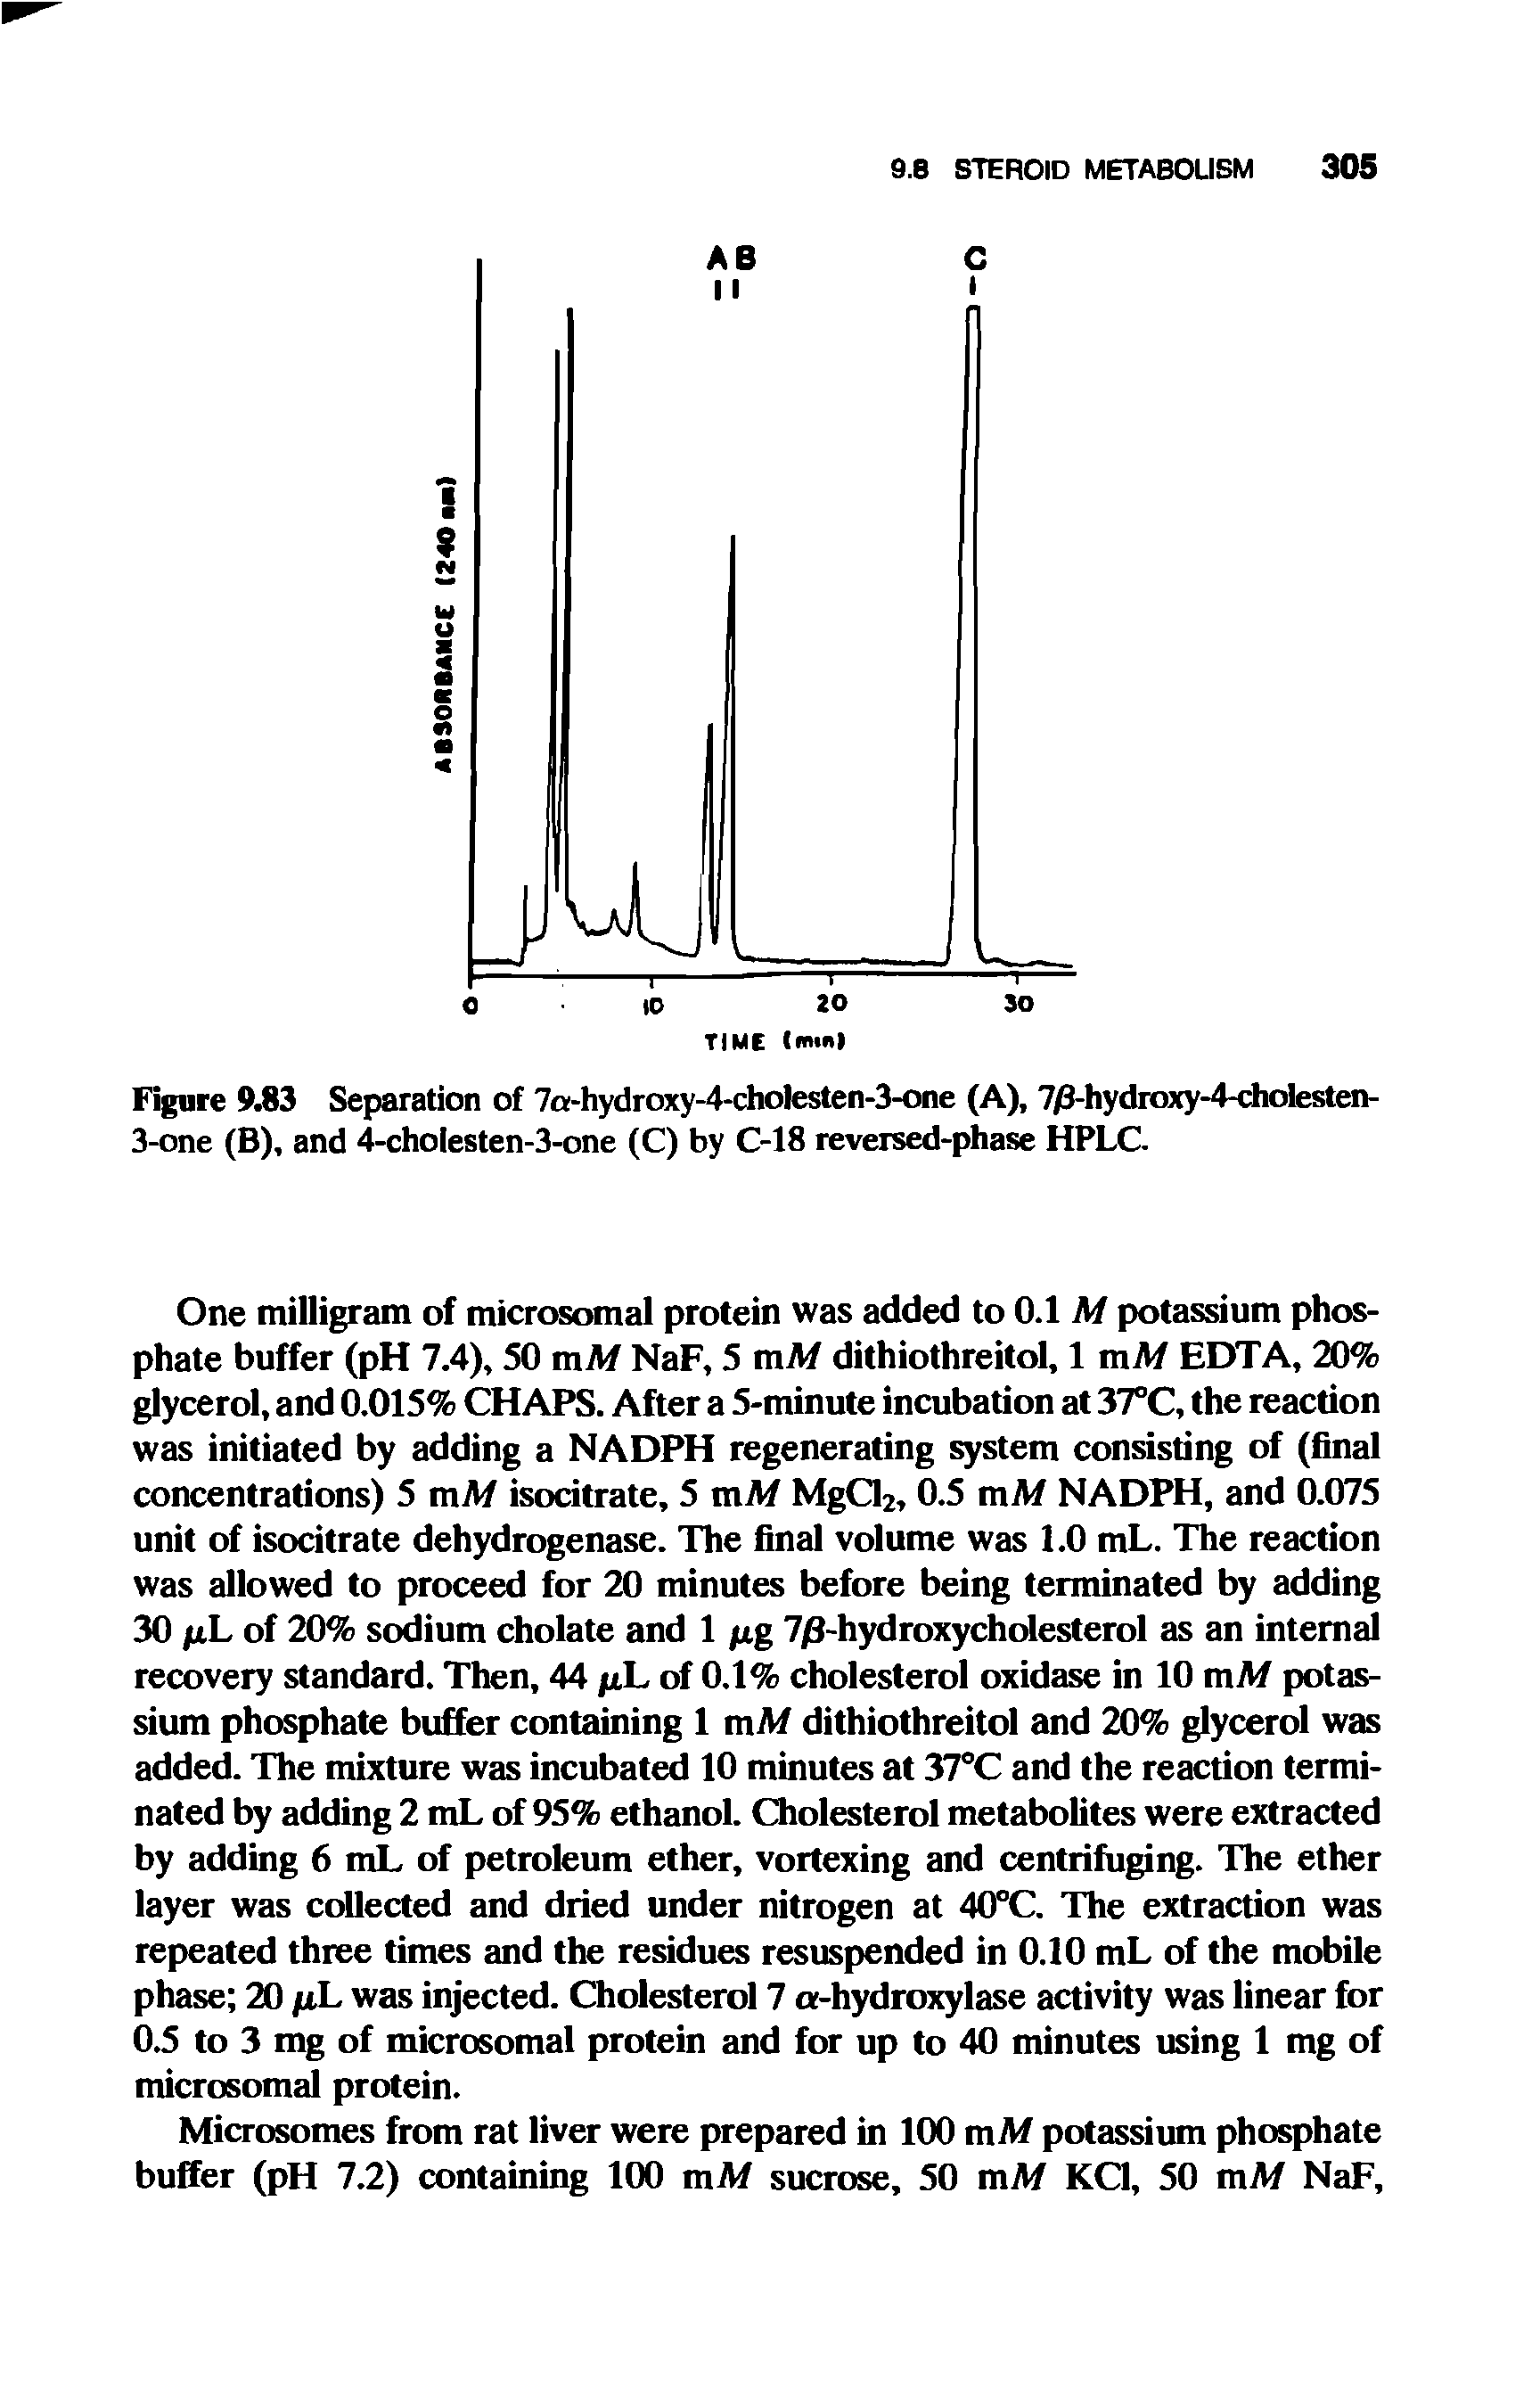 Figure 9.83 Separation of 7a-hydroxy-4-cholesten-3-one (A), 7/3-hydroxy-4-cholesten-3-one (B), and 4-cholesten-3-one (C) by C-18 reveised-phase HPLC.